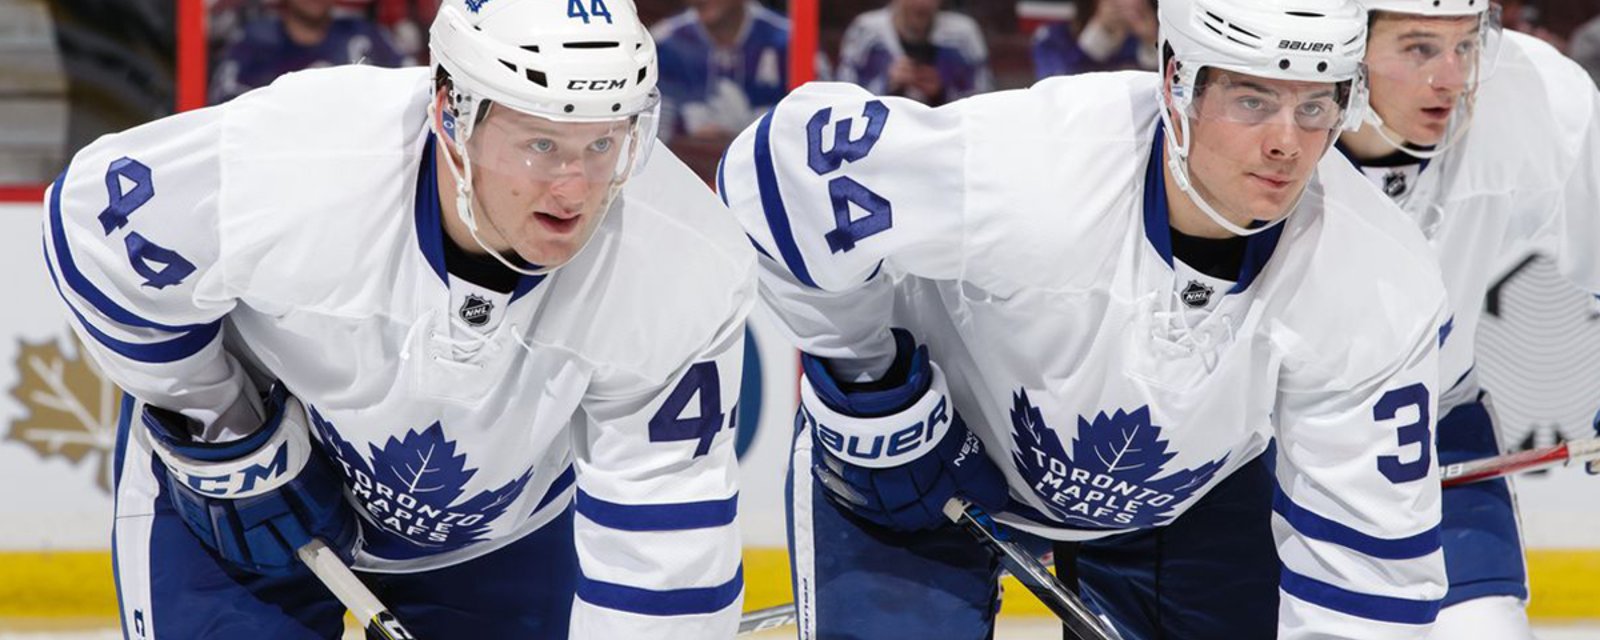 Report: Have the Leafs found their new captain?